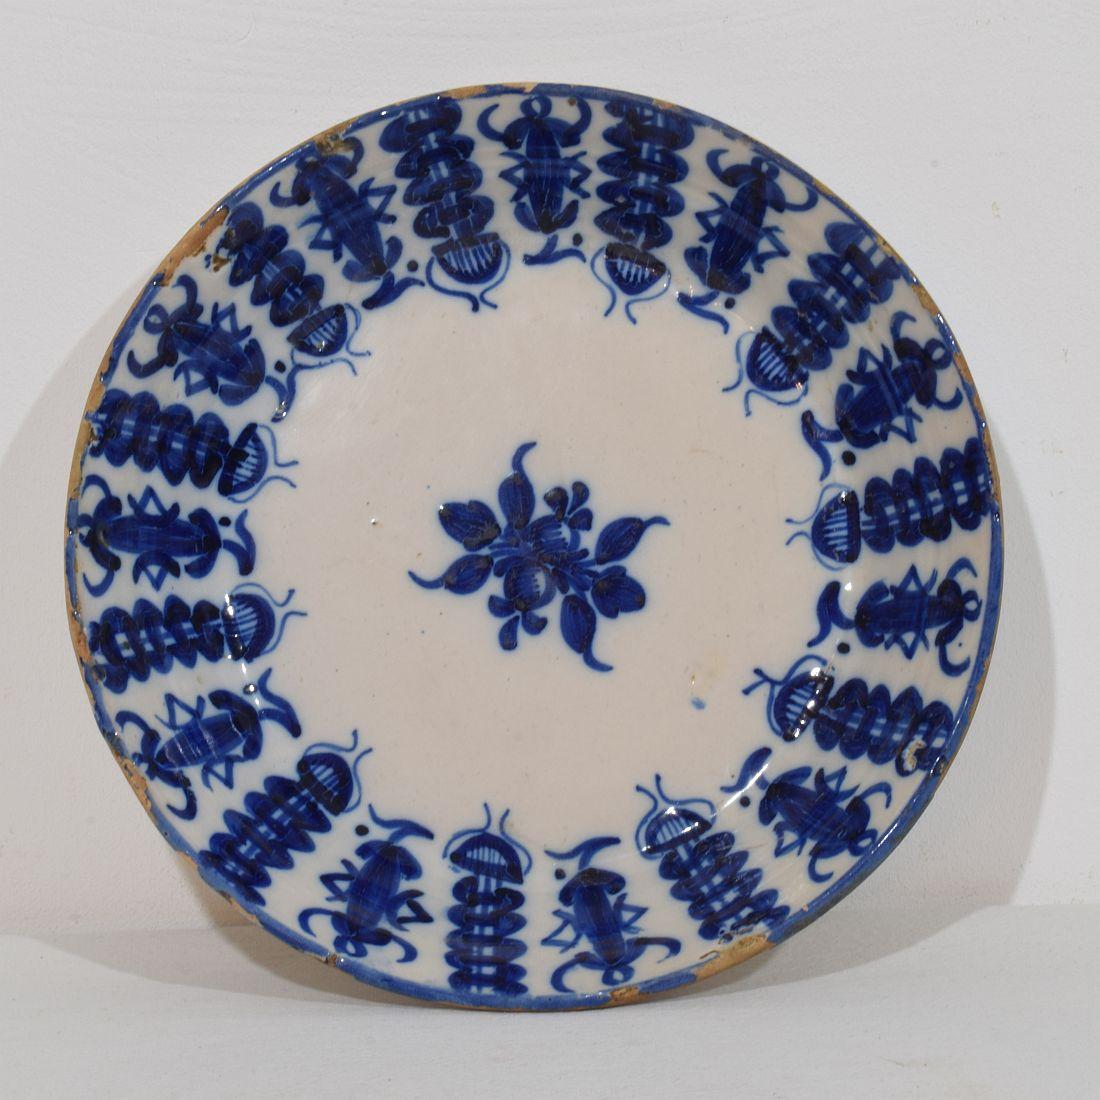 Beautiful weathered piece of pottery from Spain. Amazing blue decoration
Spain circa 1850
Good but weathered condition.